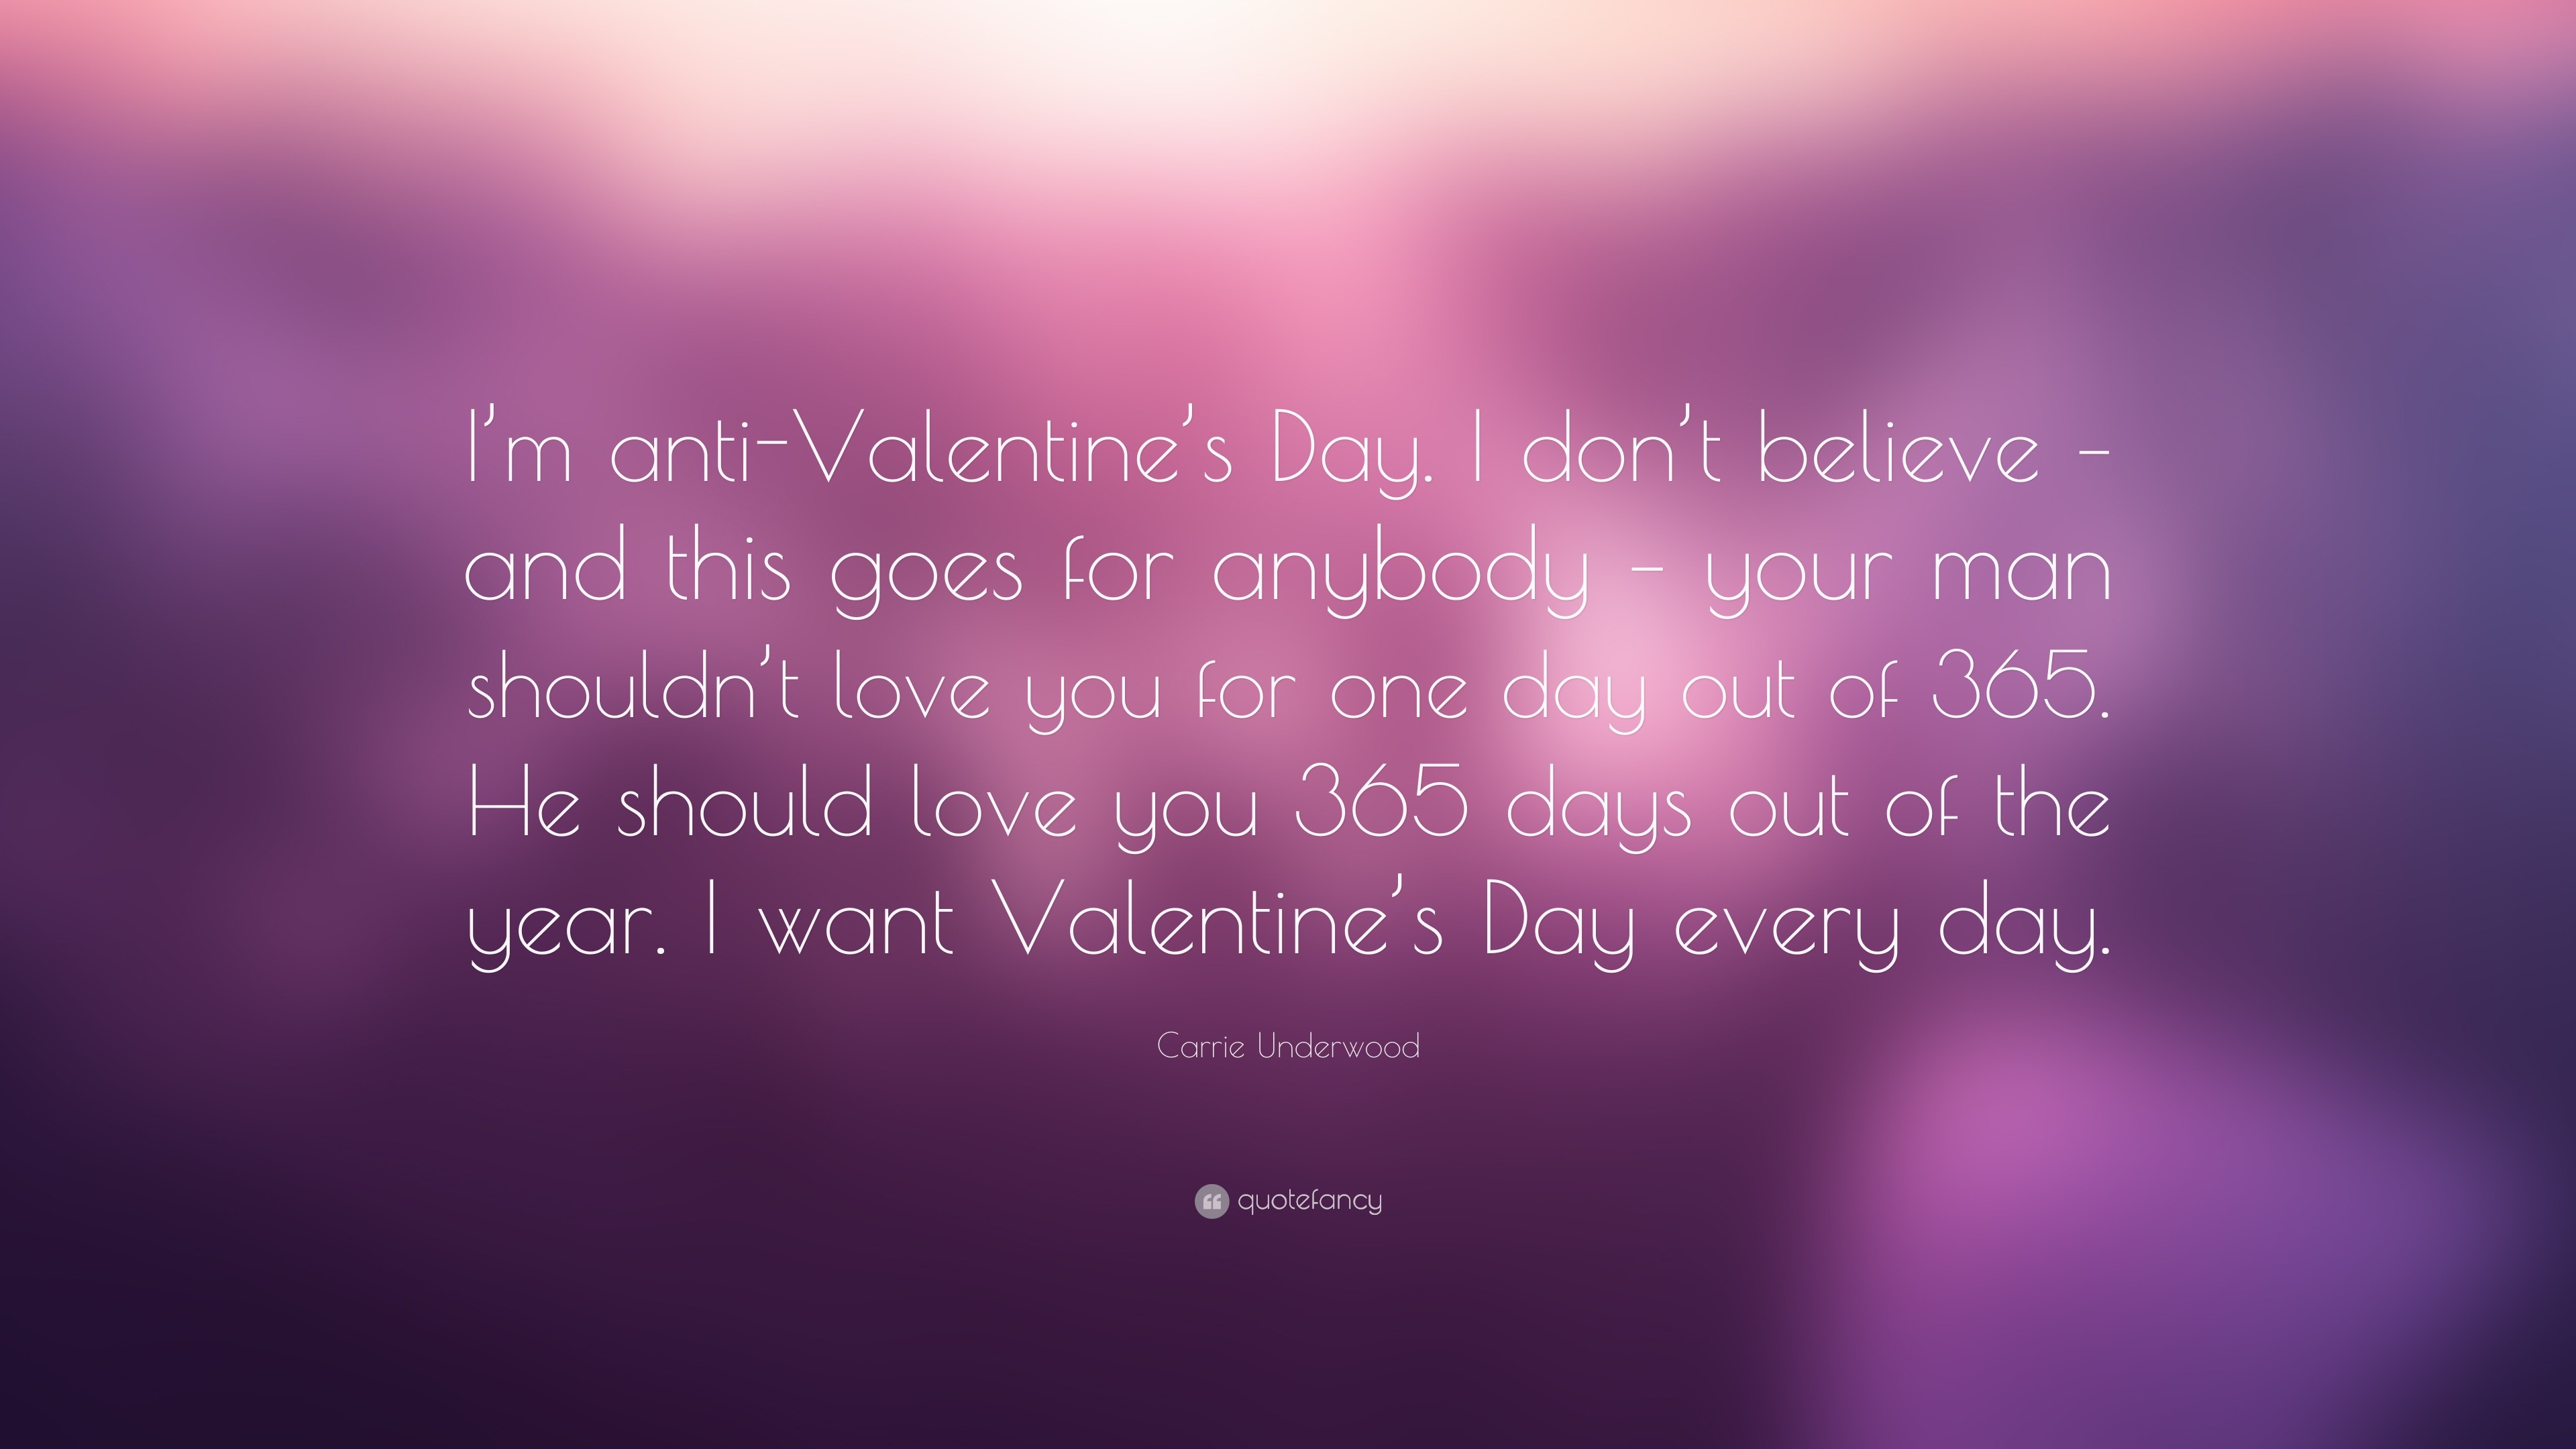 Carrie Underwood Quote “I m anti Valentine s Day I don